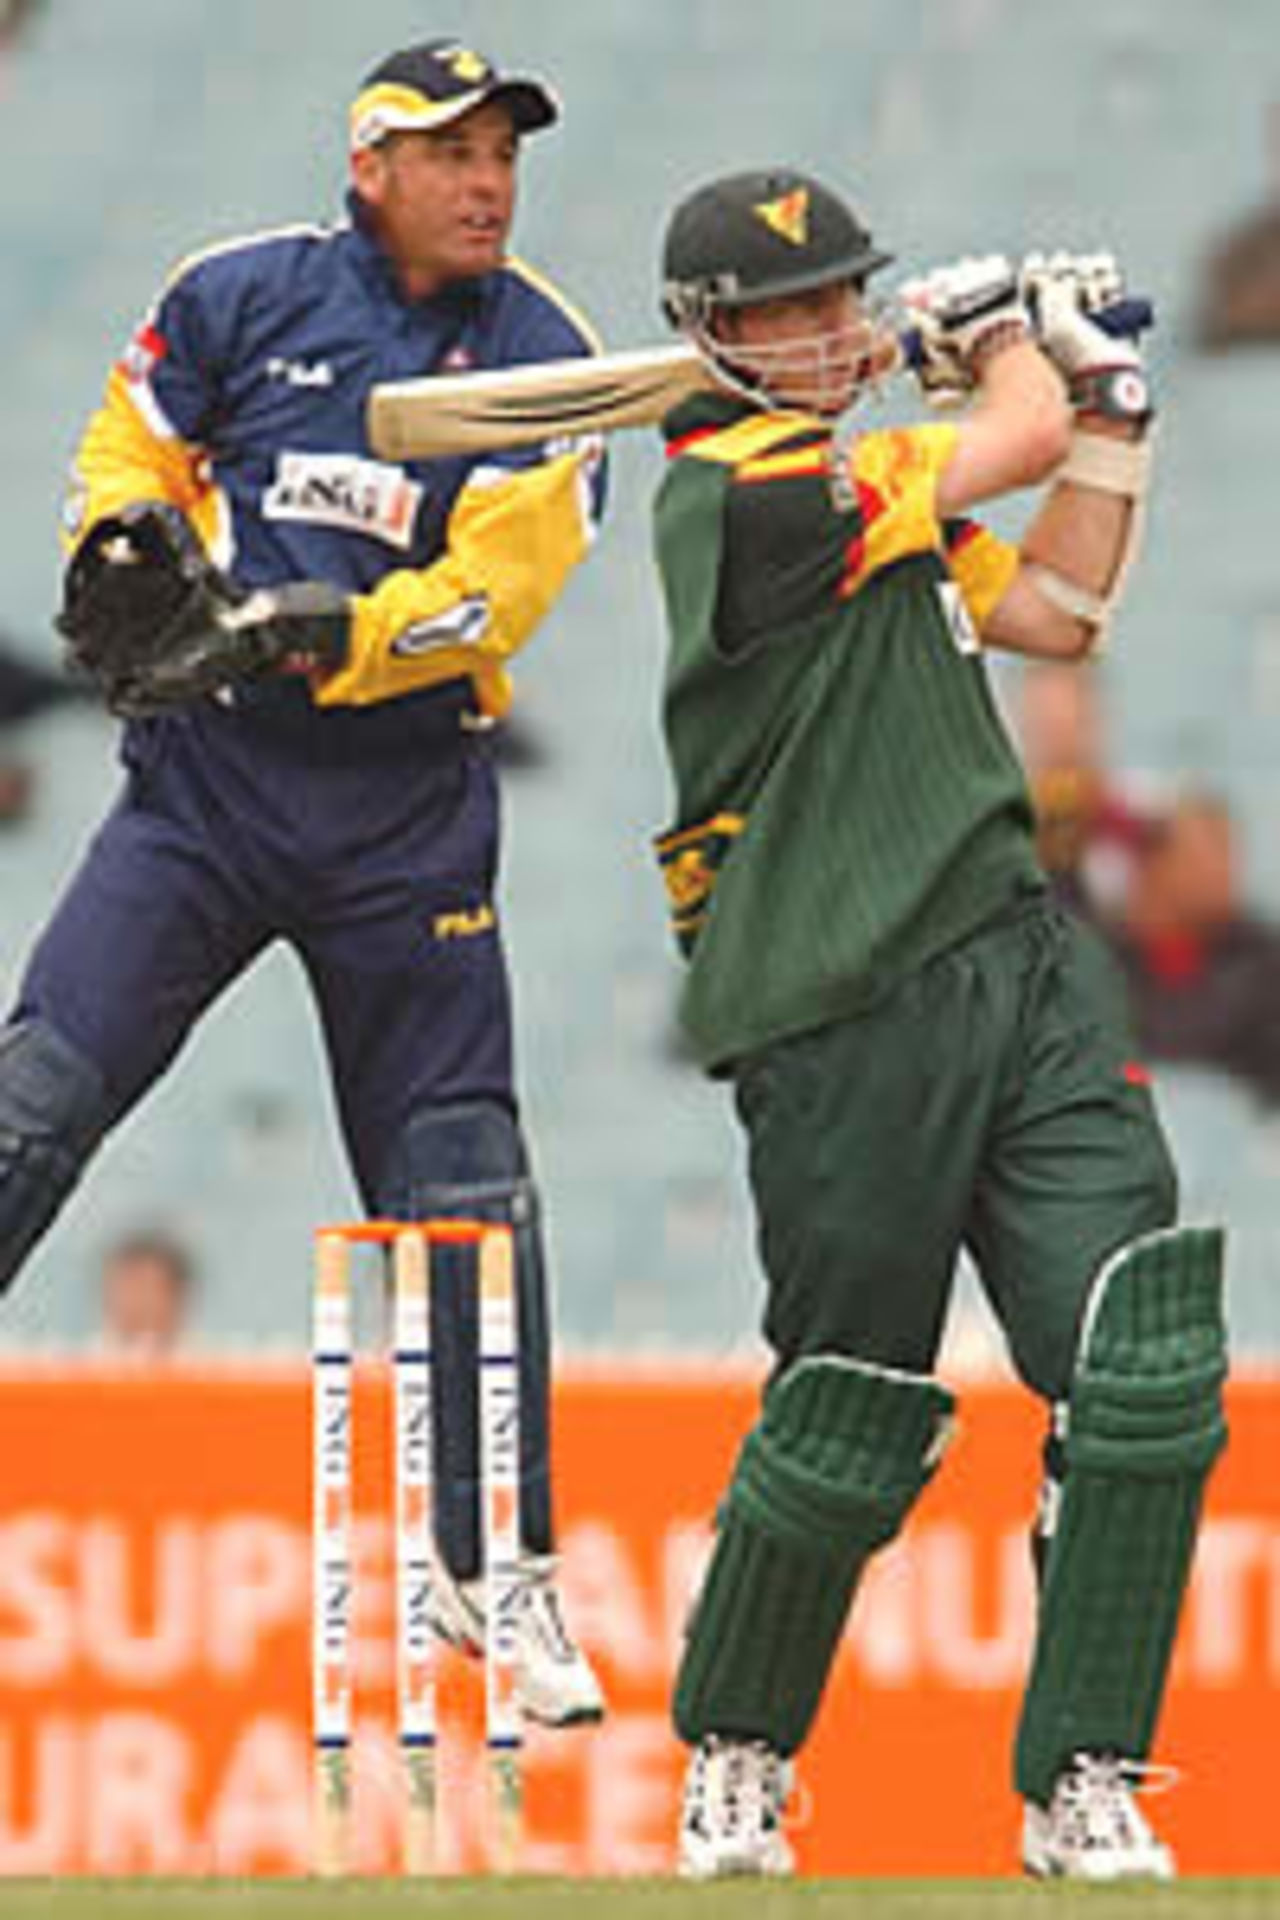 MELBOURNE - NOVEMBER 3: Michael Dighton of the Tigers in action during the ING Cup match between the Victoria Bushrangers and the Tamanian Tigers held at the Melbourne Cricket Ground, Melbourne, Australia on November 3, 2002.